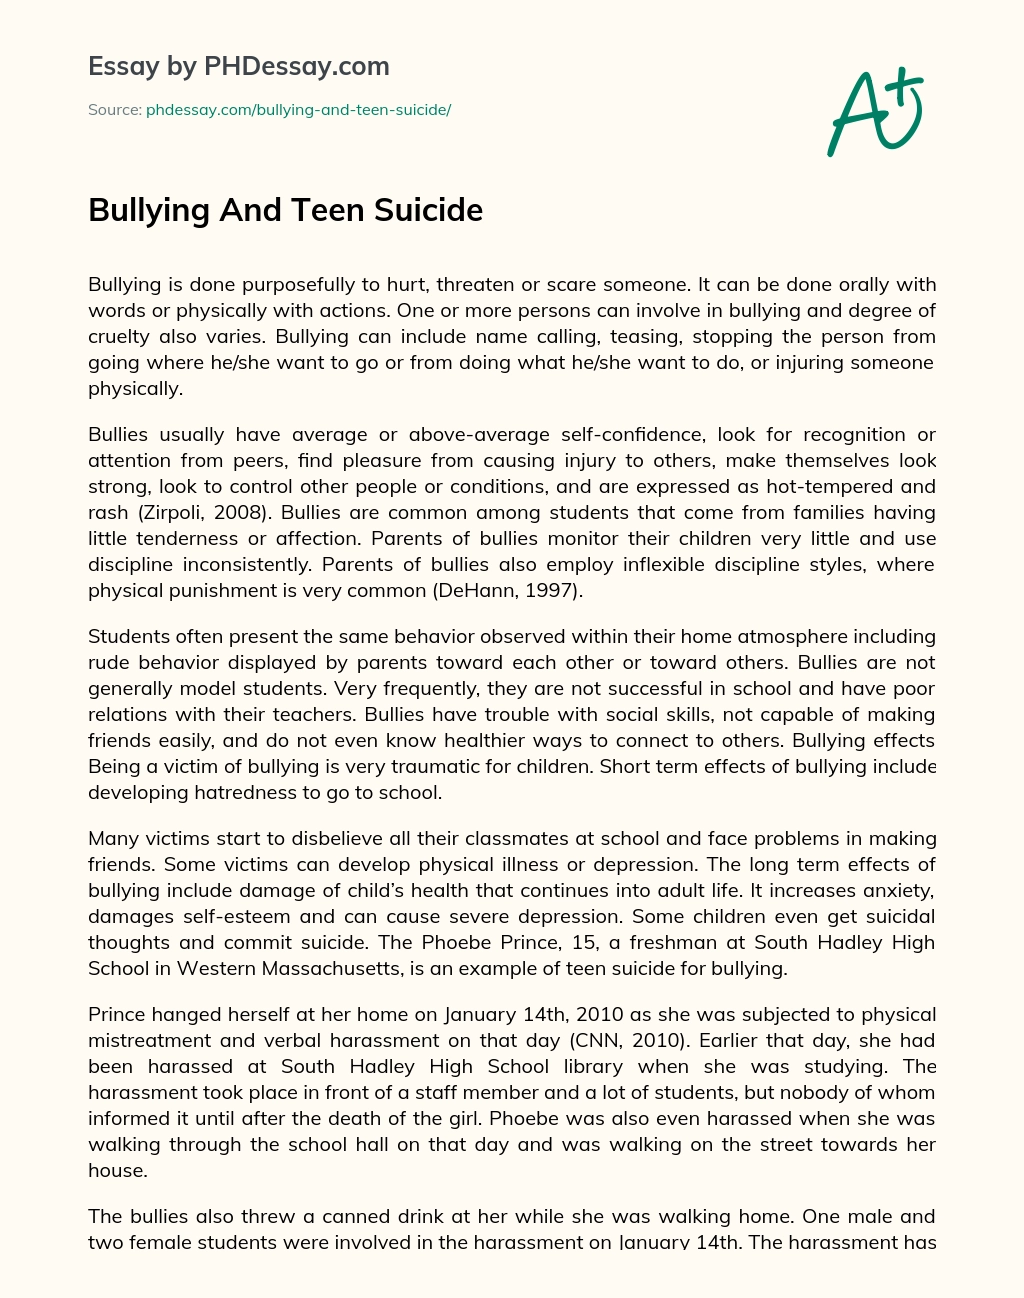 Bullying And Teen Suicide essay